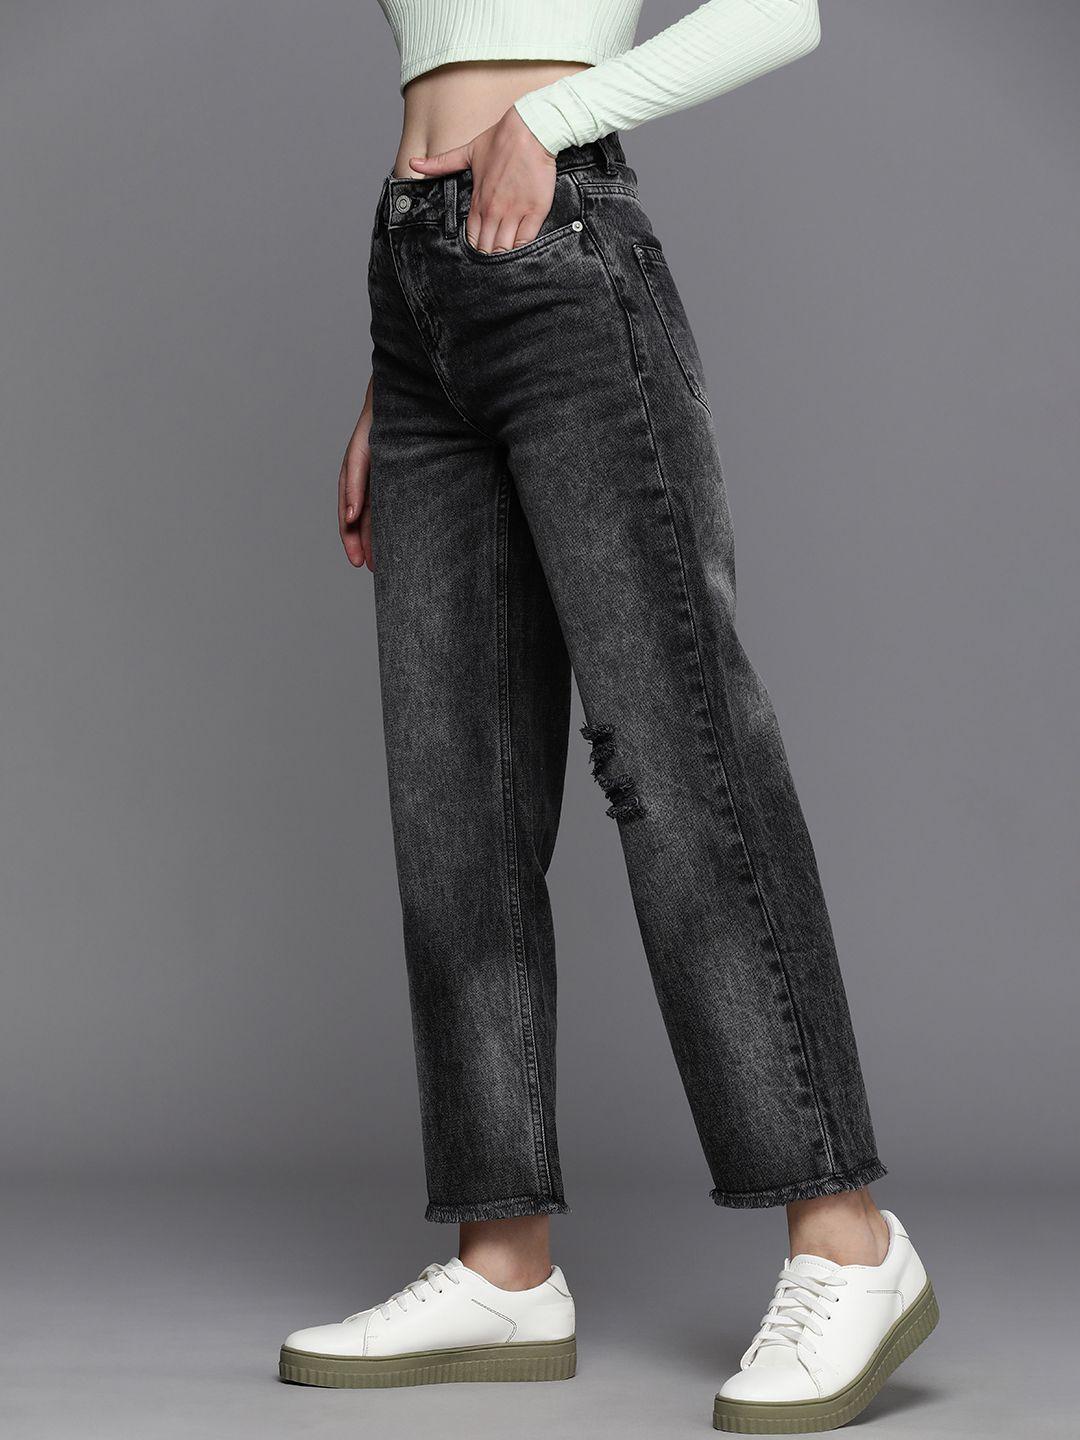 allen solly woman mid-rise low distress heavy fade stretchable cropped jeans